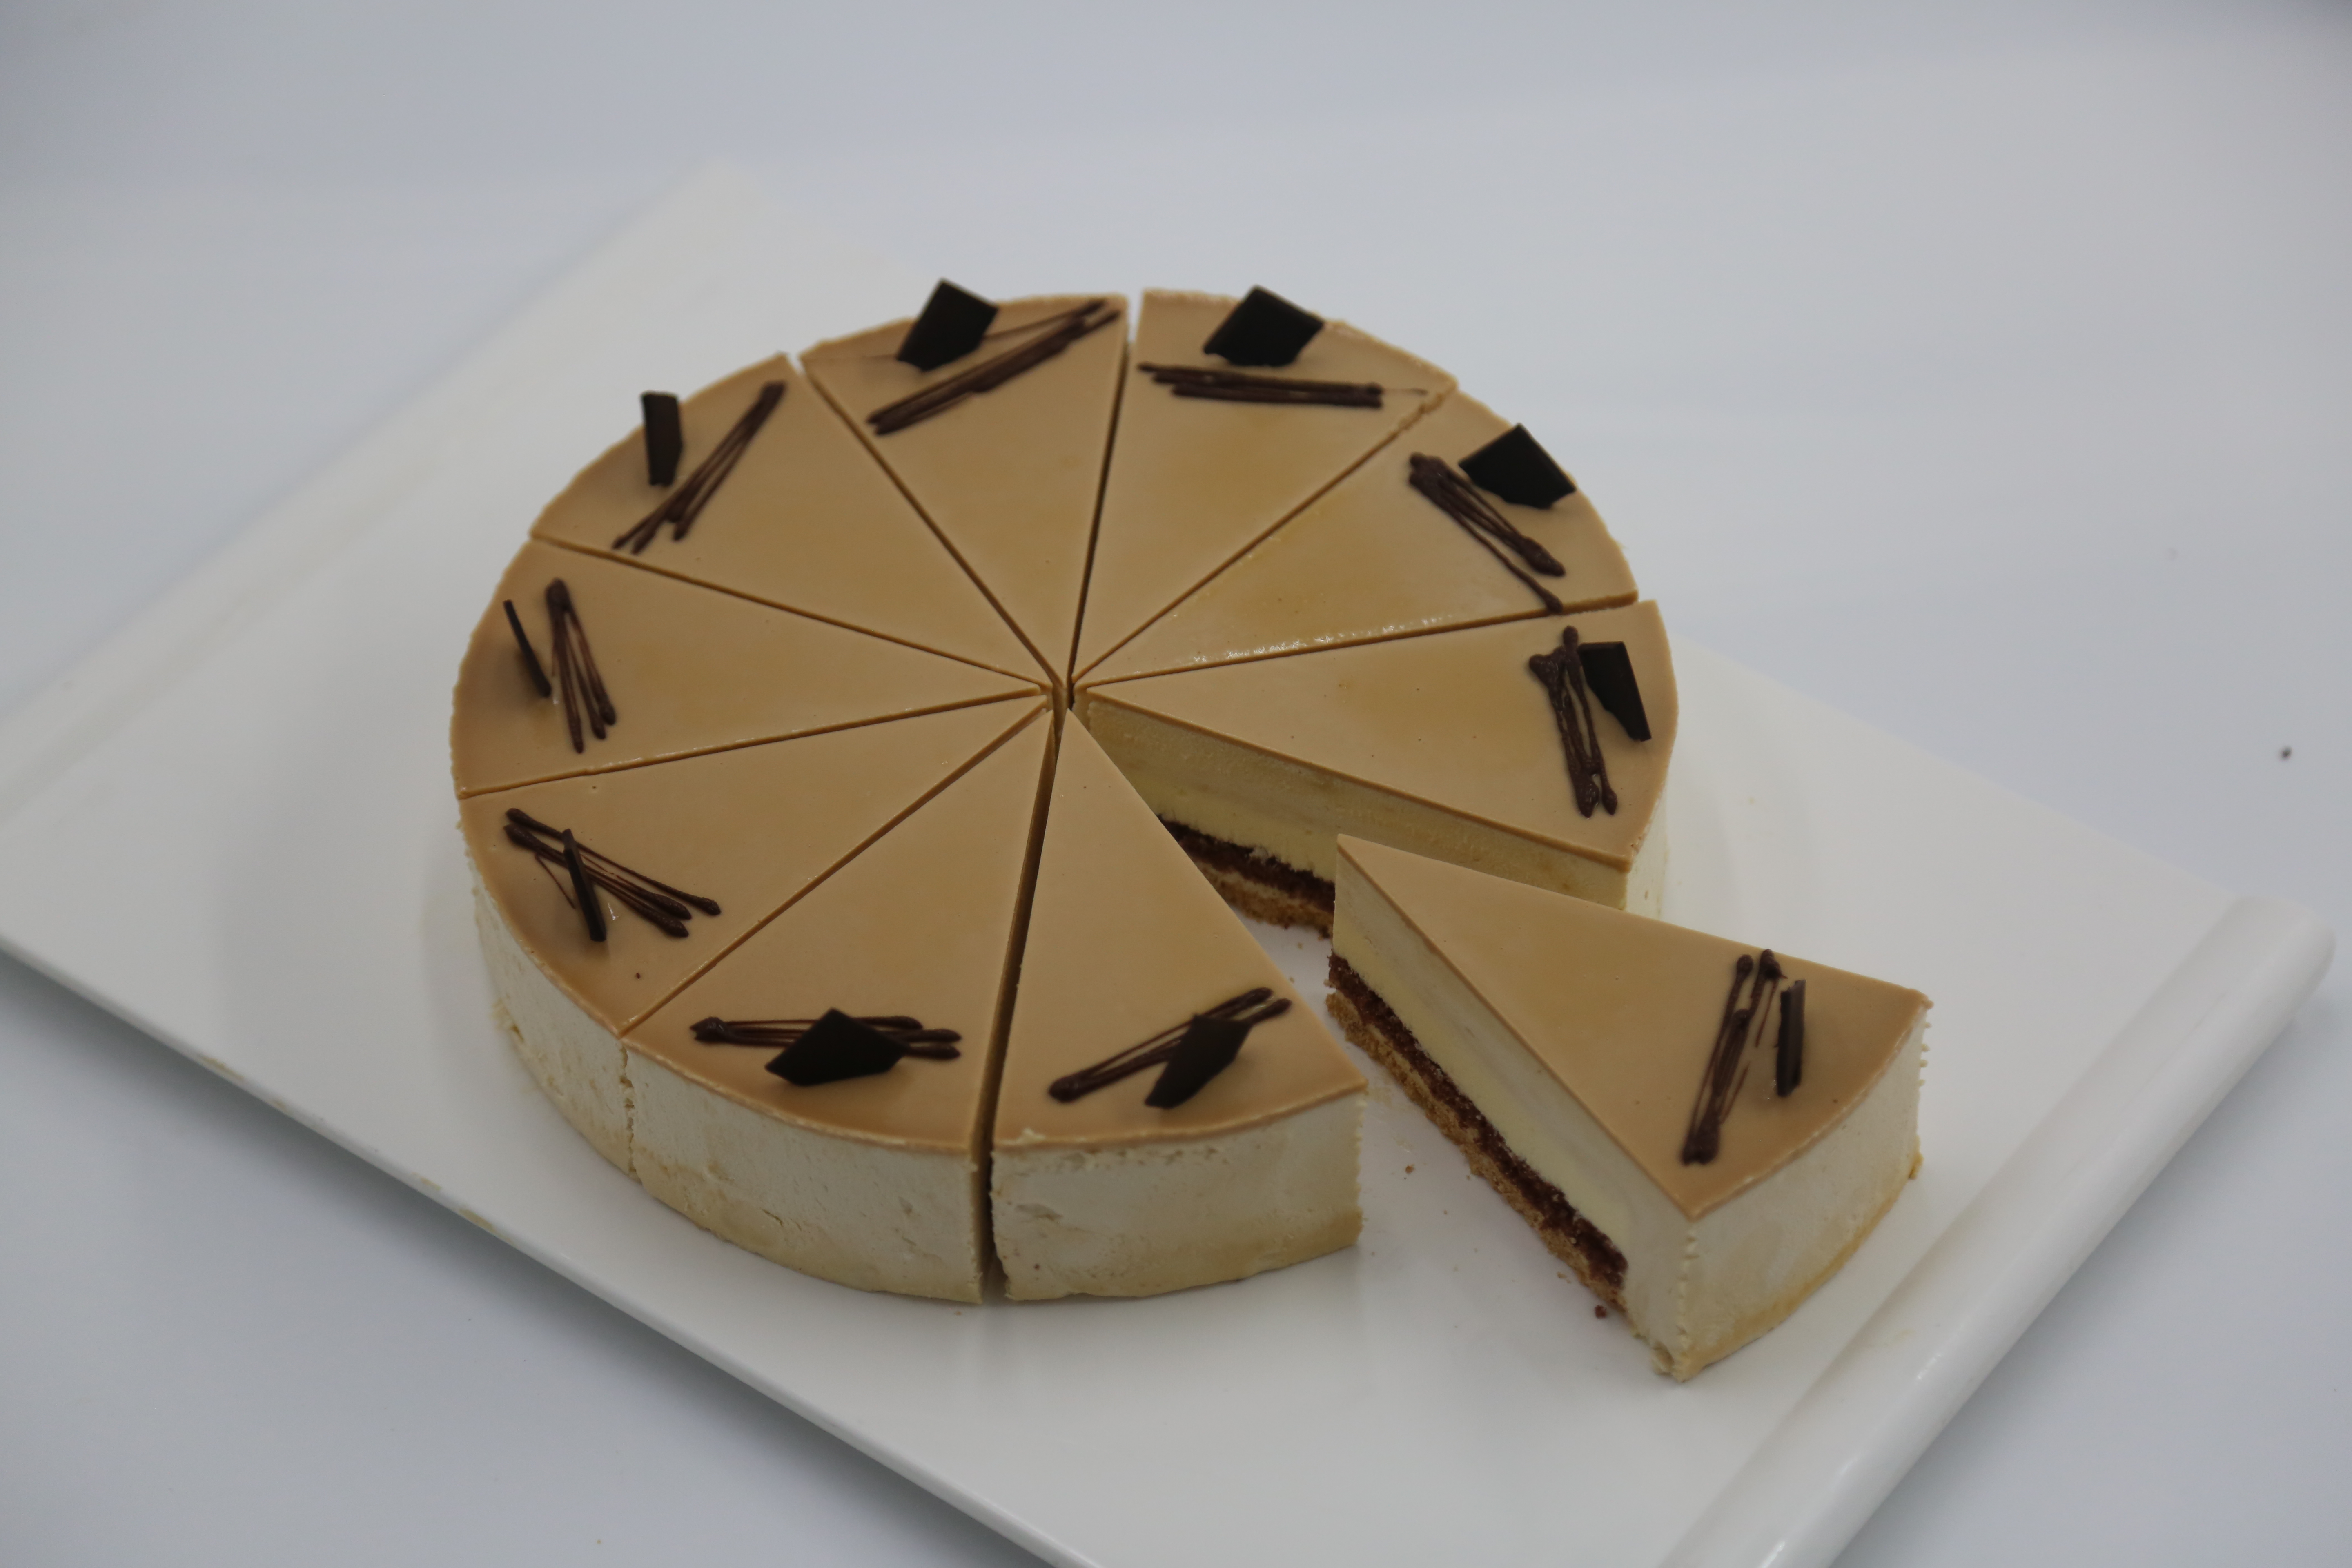 Cappuccino Mousse Cake